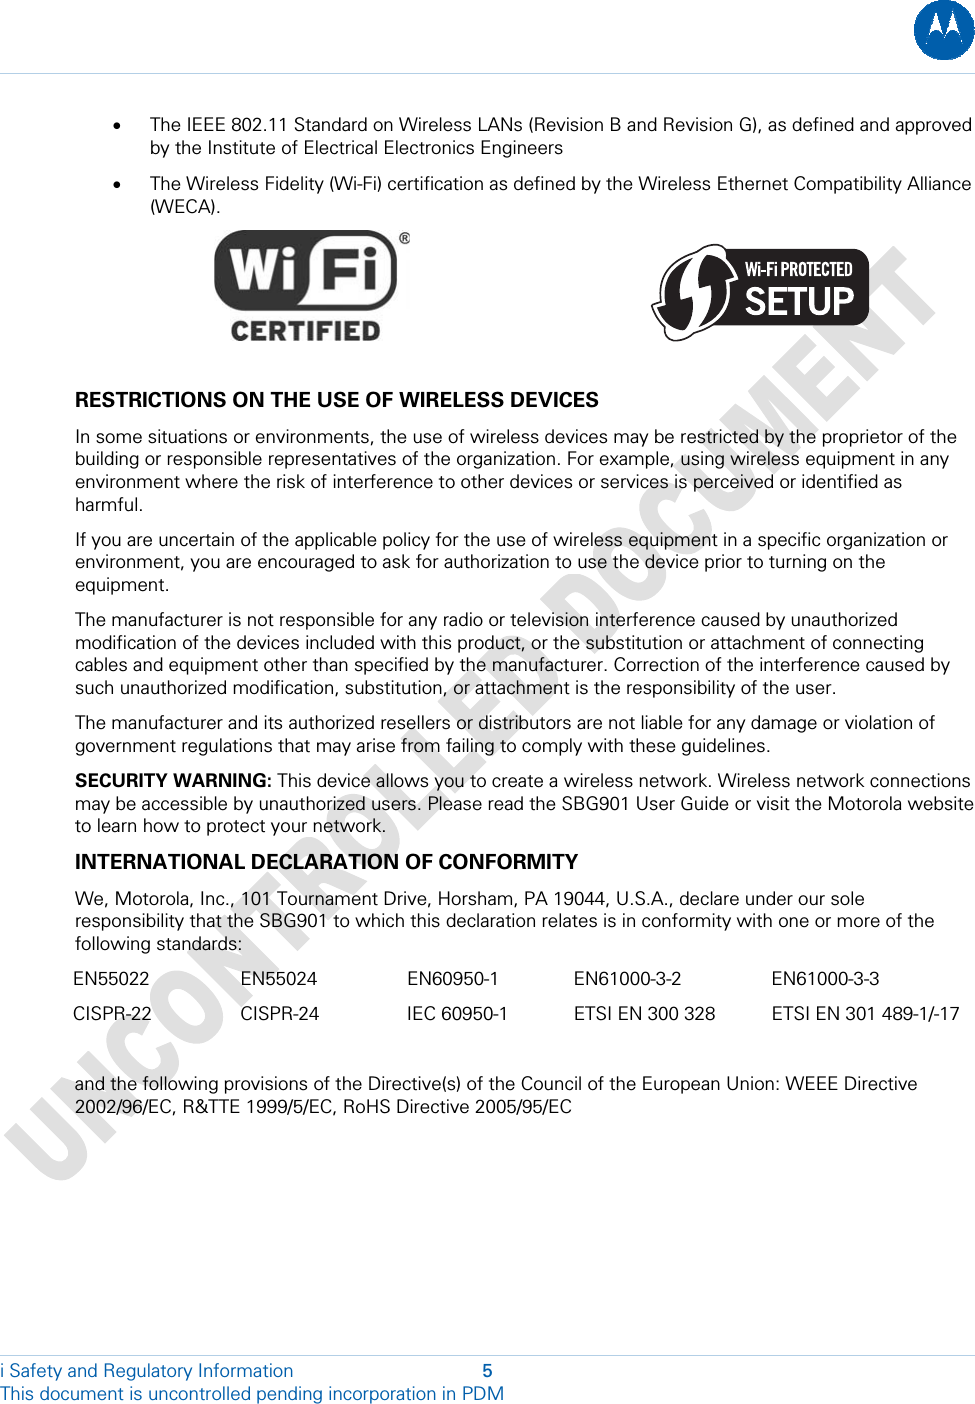  • The IEEE 802.11 Standard on Wireless LANs (Revision B and Revision G), as defined and approved by the Institute of Electrical Electronics Engineers • The Wireless Fidelity (Wi-Fi) certification as defined by the Wireless Ethernet Compatibility Alliance (WECA).                                                  RESTRICTIONS ON THE USE OF WIRELESS DEVICES In some situations or environments, the use of wireless devices may be restricted by the proprietor of the building or responsible representatives of the organization. For example, using wireless equipment in any environment where the risk of interference to other devices or services is perceived or identified as harmful. If you are uncertain of the applicable policy for the use of wireless equipment in a specific organization or environment, you are encouraged to ask for authorization to use the device prior to turning on the equipment. The manufacturer is not responsible for any radio or television interference caused by unauthorized modification of the devices included with this product, or the substitution or attachment of connecting cables and equipment other than specified by the manufacturer. Correction of the interference caused by such unauthorized modification, substitution, or attachment is the responsibility of the user. The manufacturer and its authorized resellers or distributors are not liable for any damage or violation of government regulations that may arise from failing to comply with these guidelines. SECURITY WARNING: This device allows you to create a wireless network. Wireless network connections may be accessible by unauthorized users. Please read the SBG901 User Guide or visit the Motorola website to learn how to protect your network. INTERNATIONAL DECLARATION OF CONFORMITY We, Motorola, Inc., 101 Tournament Drive, Horsham, PA 19044, U.S.A., declare under our sole responsibility that the SBG901 to which this declaration relates is in conformity with one or more of the following standards: EN55022 EN55024 EN60950-1 EN61000-3-2 EN61000-3-3 CISPR-22 CISPR-24 IEC 60950-1 ETSI EN 300 328  ETSI EN 301 489-1/-17  and the following provisions of the Directive(s) of the Council of the European Union: WEEE Directive 2002/96/EC, R&amp;TTE 1999/5/EC, RoHS Directive 2005/95/EC i Safety and Regulatory Information  5 This document is uncontrolled pending incorporation in PDM  